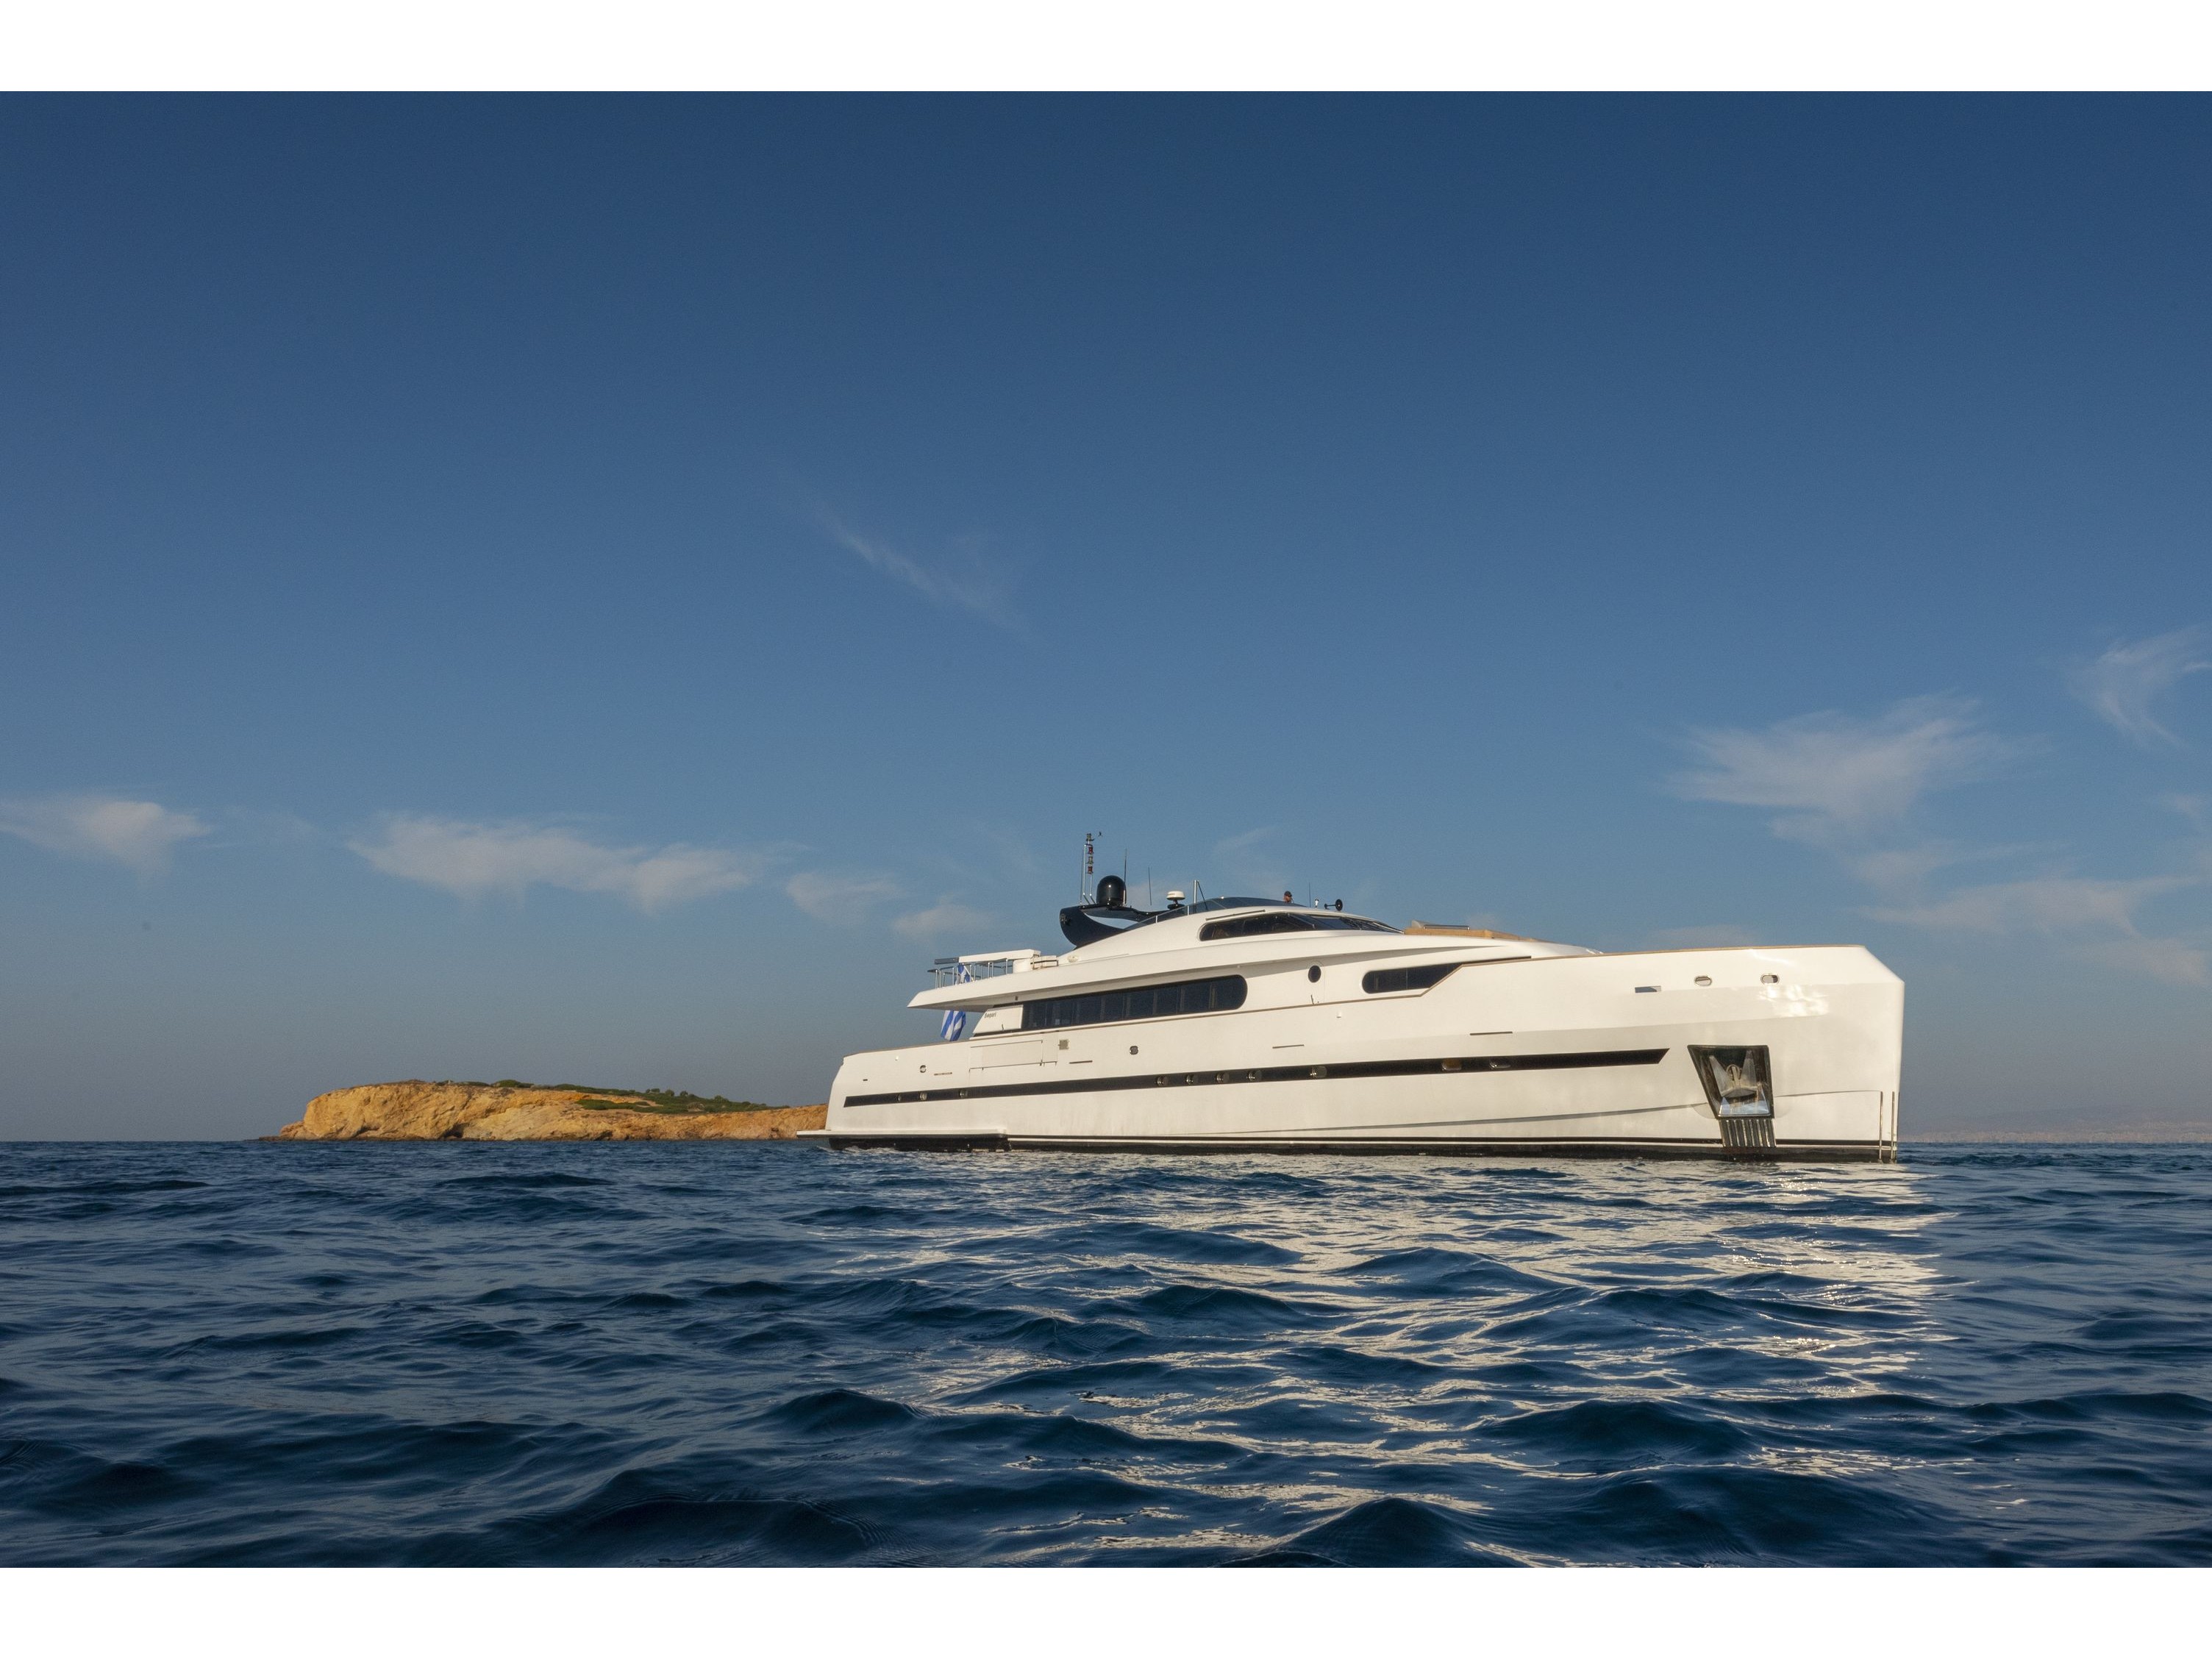 Motoryacht - Superyacht charter Saint Vincent and the Grenadines & Boat hire in Greece Athens and Saronic Gulf Athens Piraeus Athens Marina S.A. 1